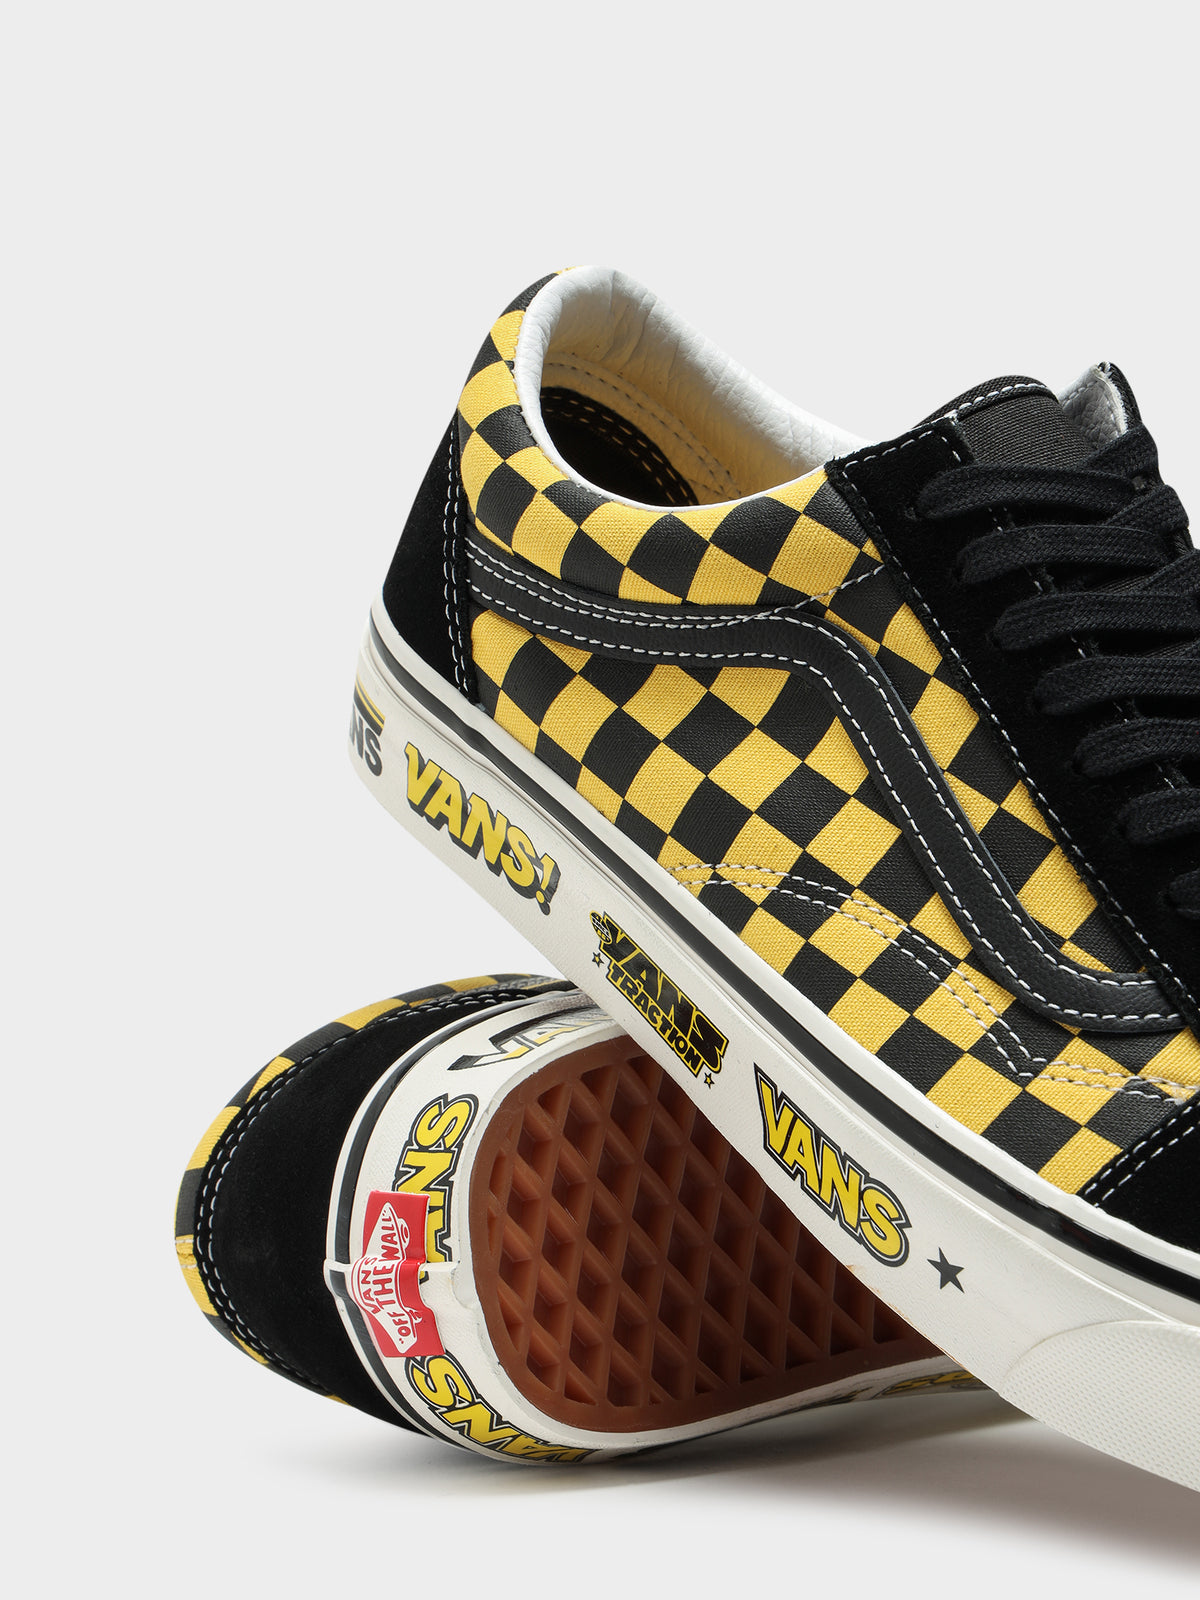 Unisex Anaheim Factory Old Skool 36 DX Sneakers in Freestyle Black &amp; Spectra Yellow